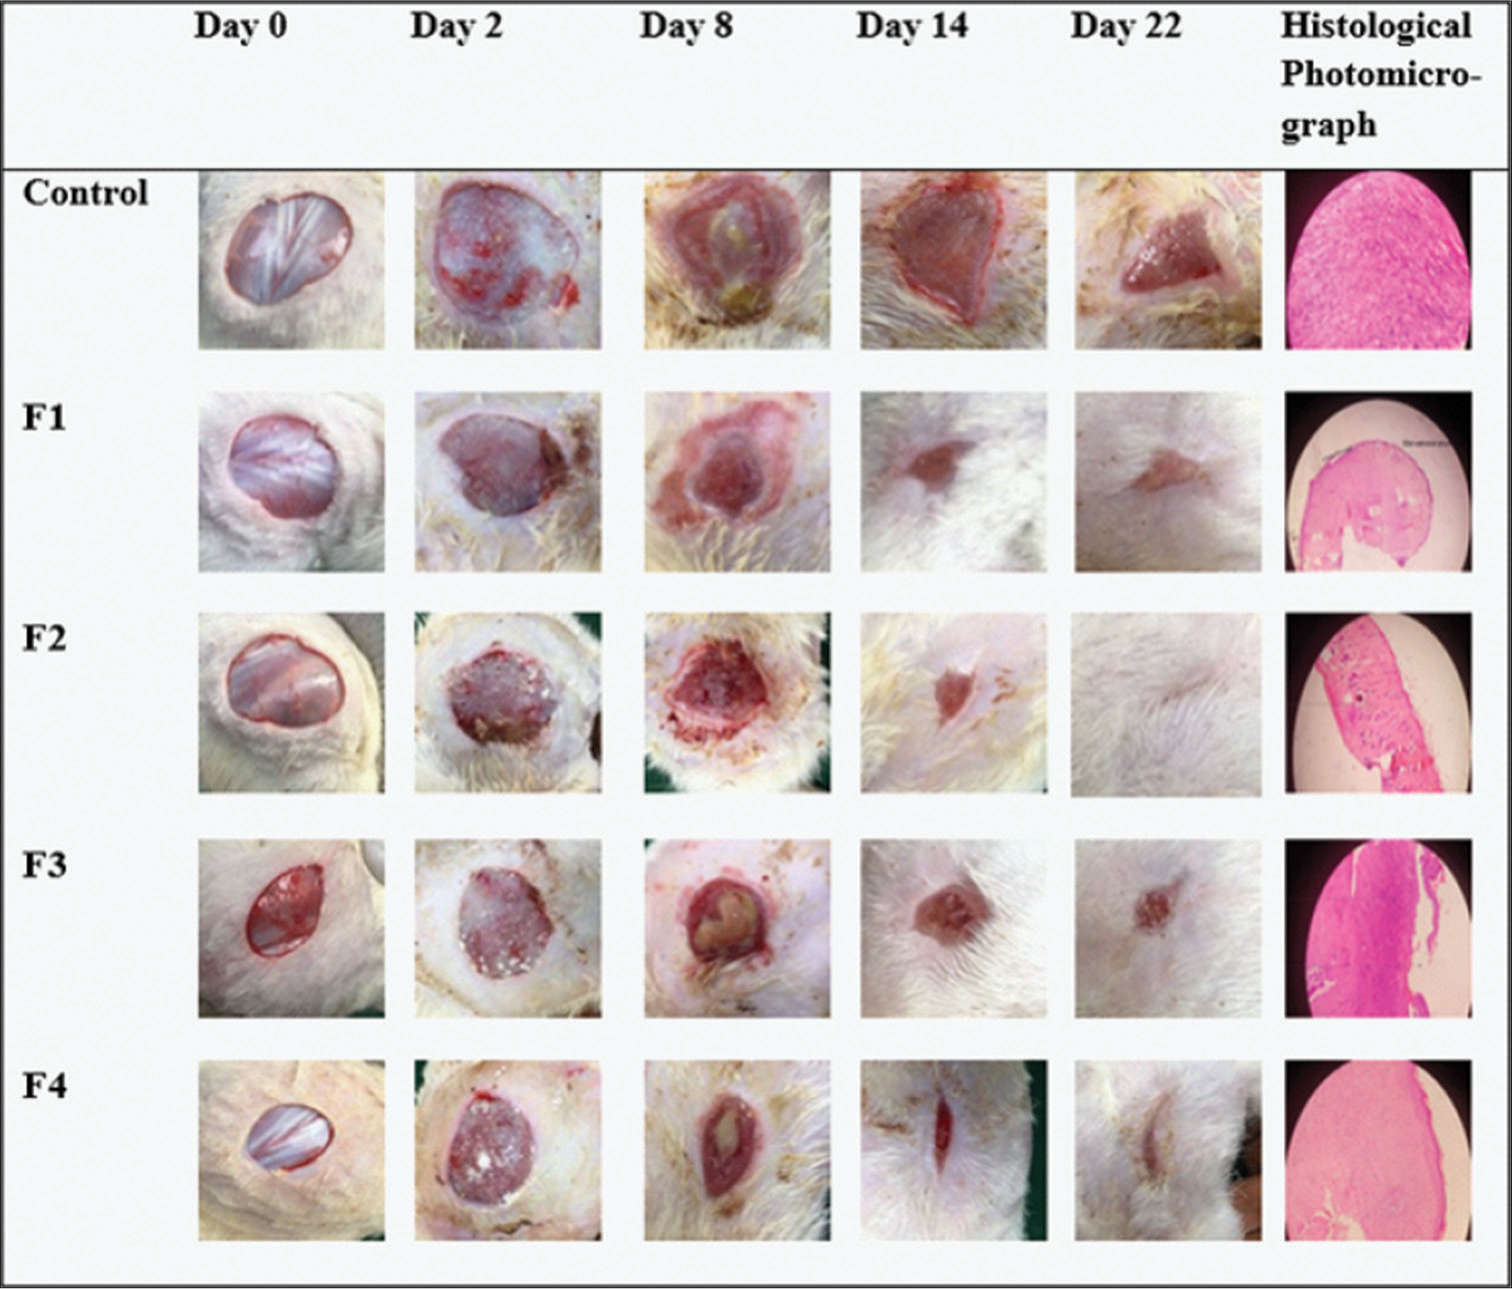 Representative images of wounds showing contraction as the treatment period elapsed and histological photomicrograph. F: Formulation.